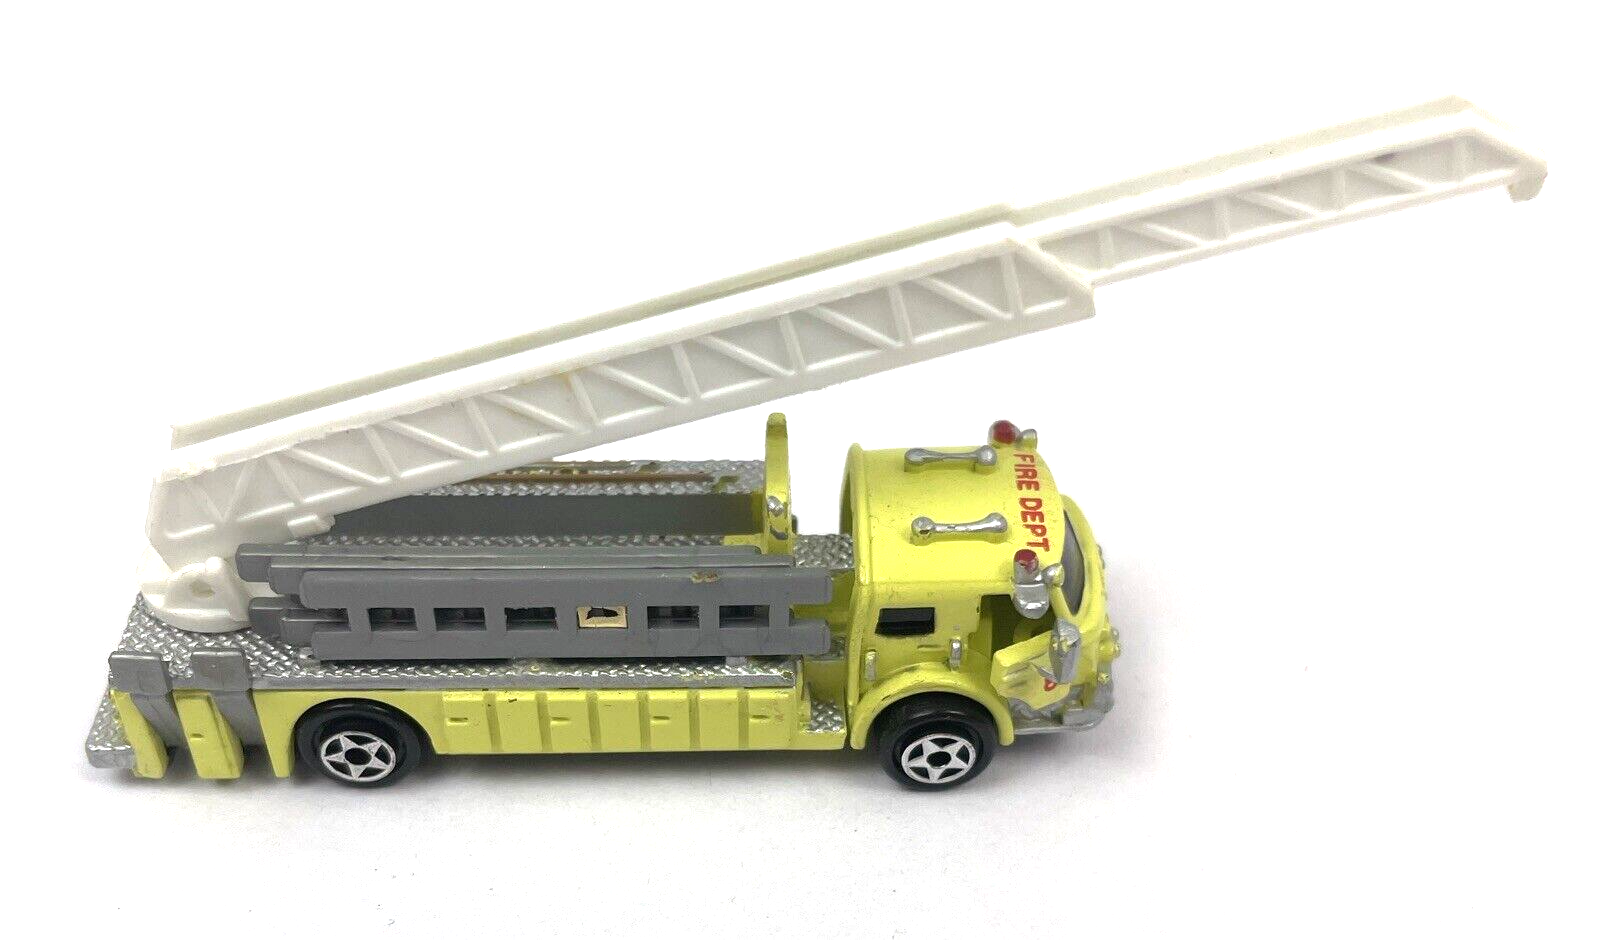 Micro Machines Fire Truck Extendable Ladder Opening Doors Yellow Galoob Vintage - $25.00